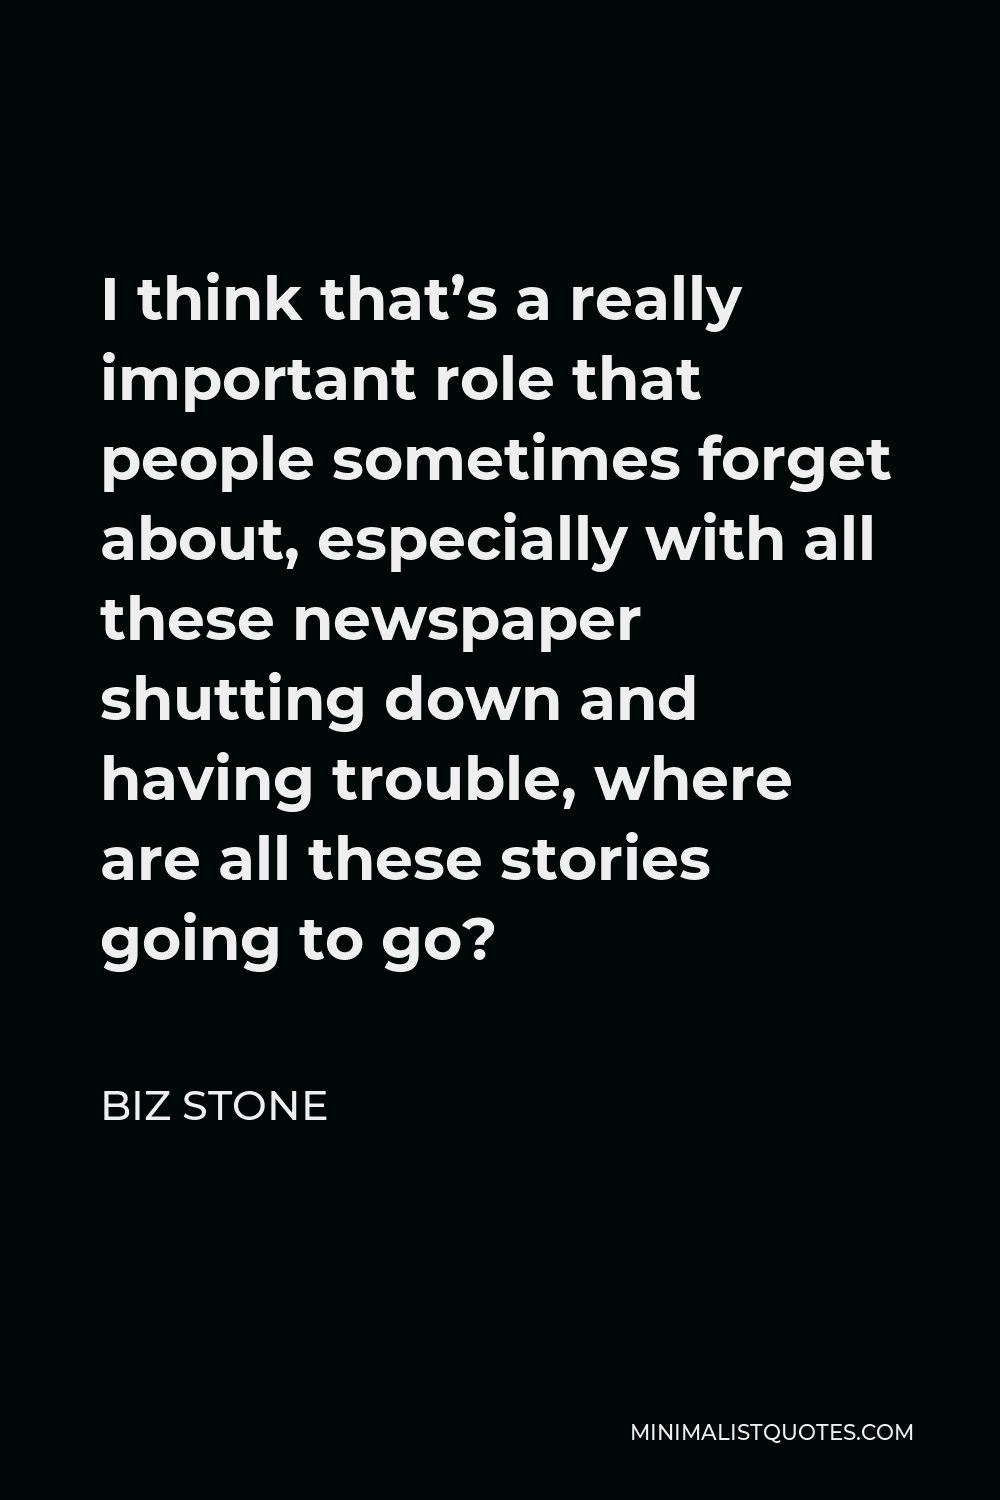 Biz Stone Quote - I think that’s a really important role that people sometimes forget about, especially with all these newspaper shutting down and having trouble, where are all these stories going to go?